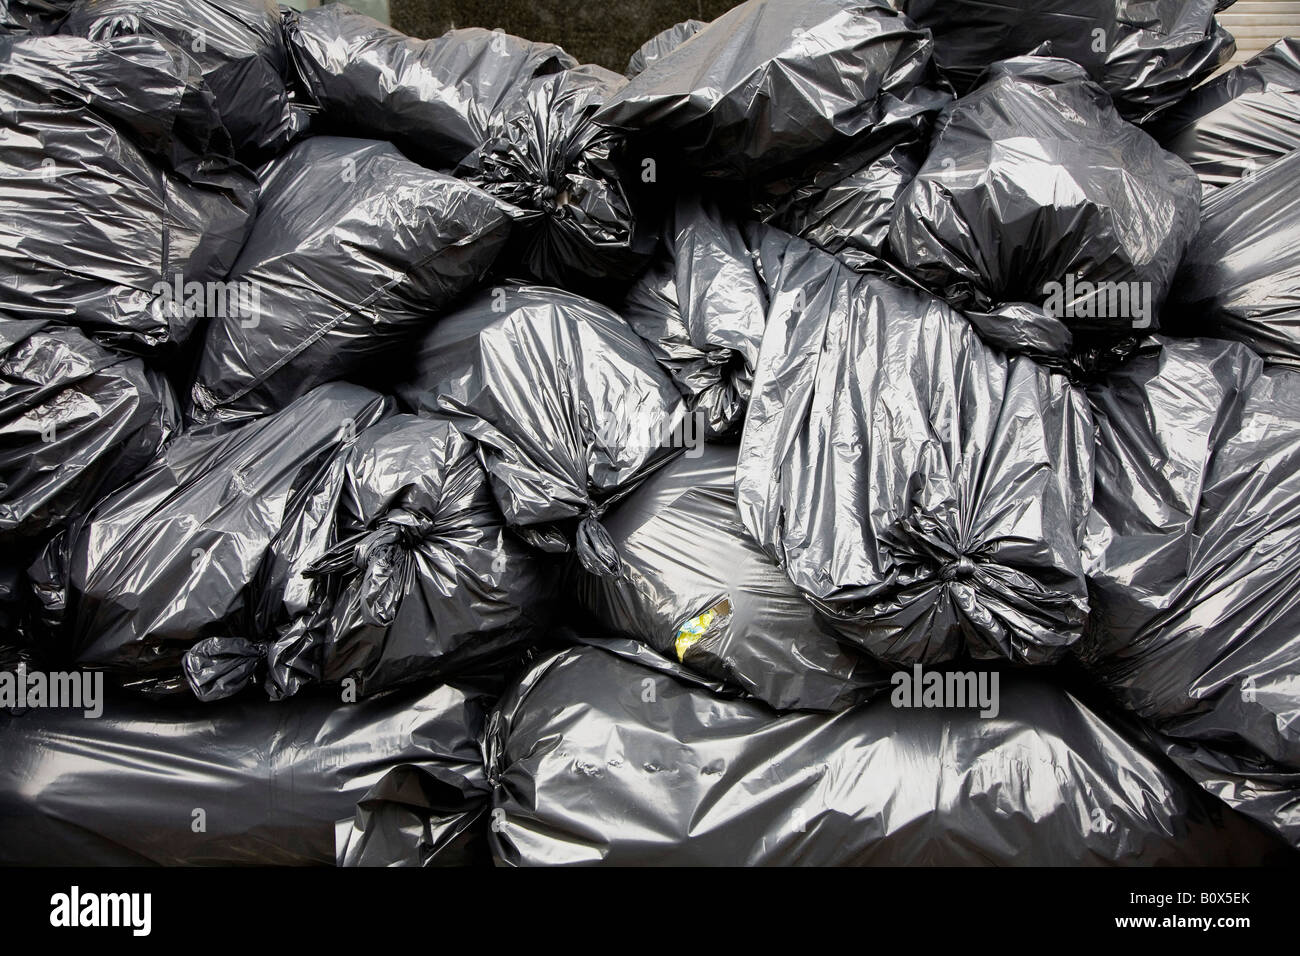 A pile of black rubbish bags Stock Photo - Alamy